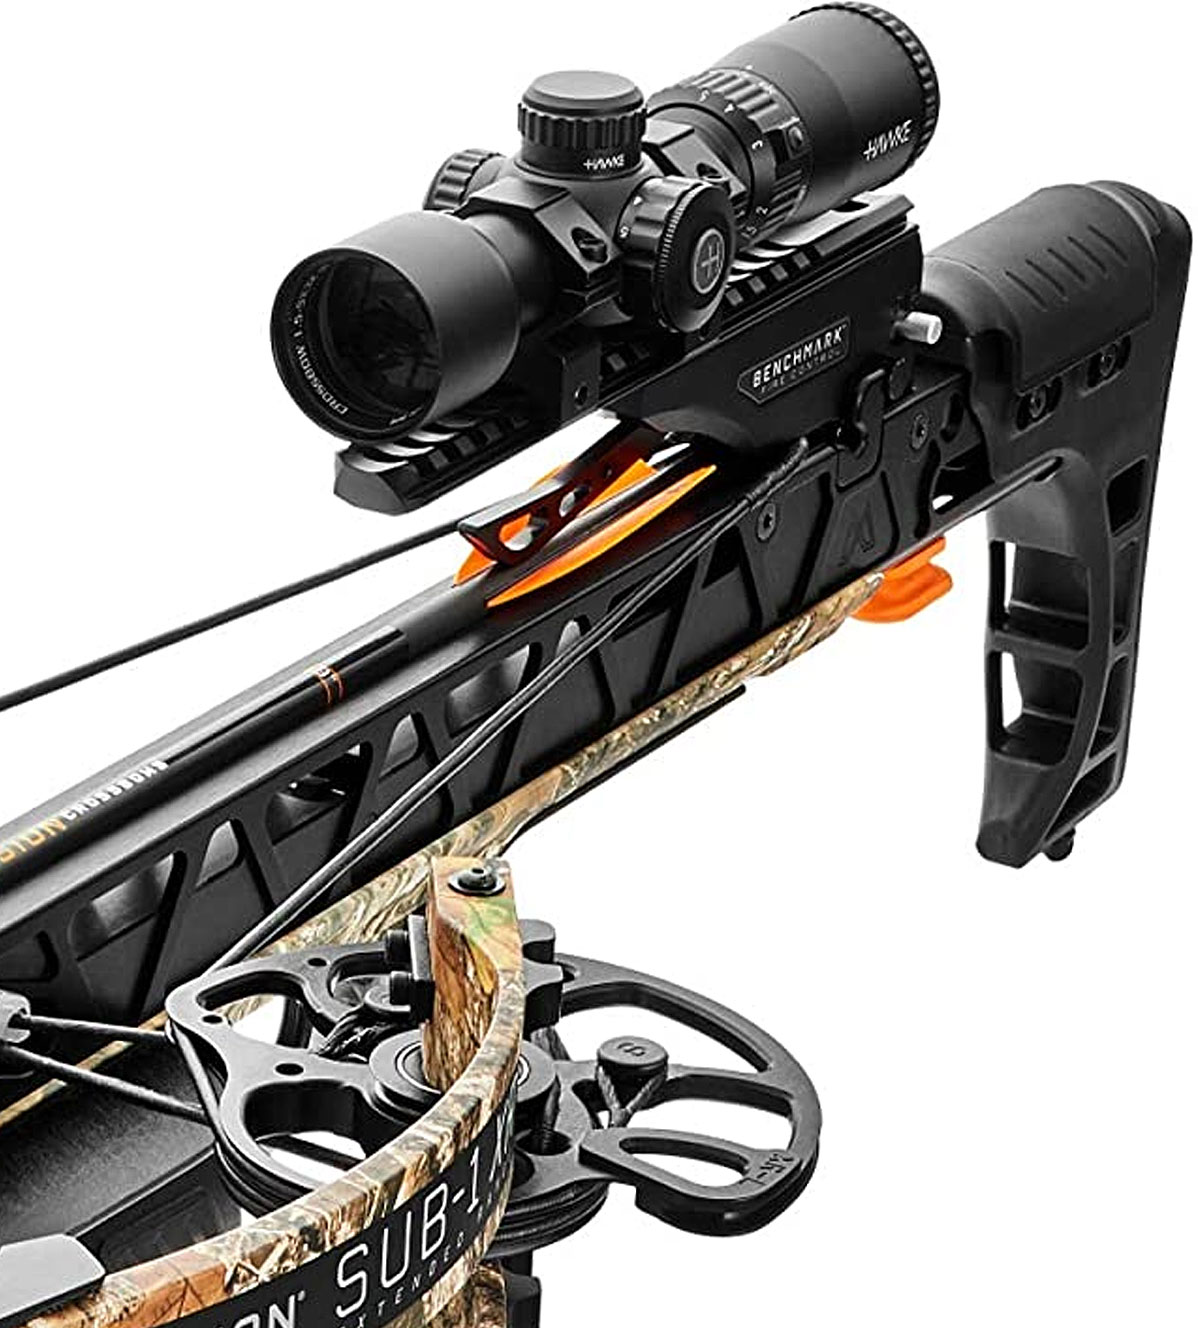 Mission Archery Sub1 XR Crossbow Review